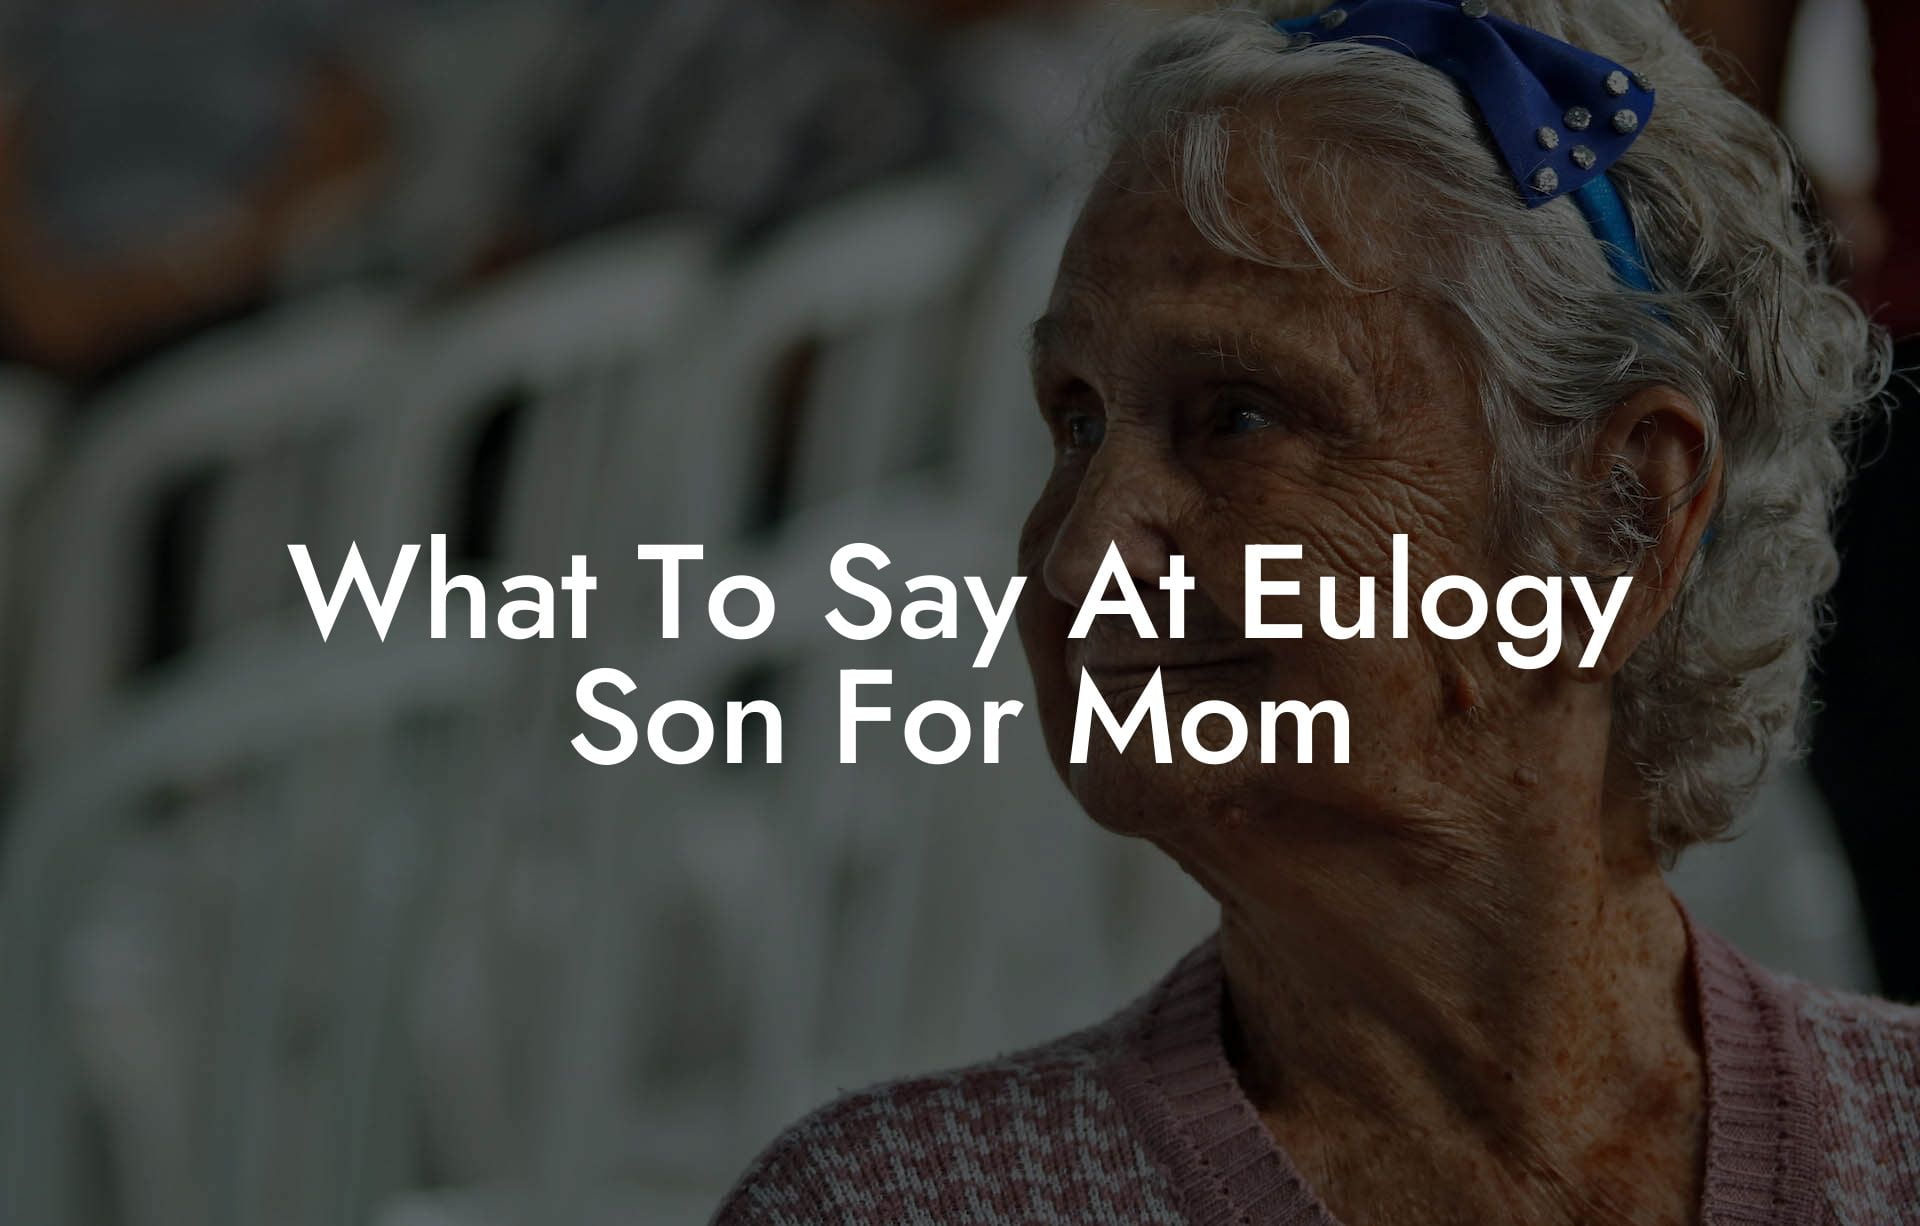 What To Say At Eulogy Son For Mom